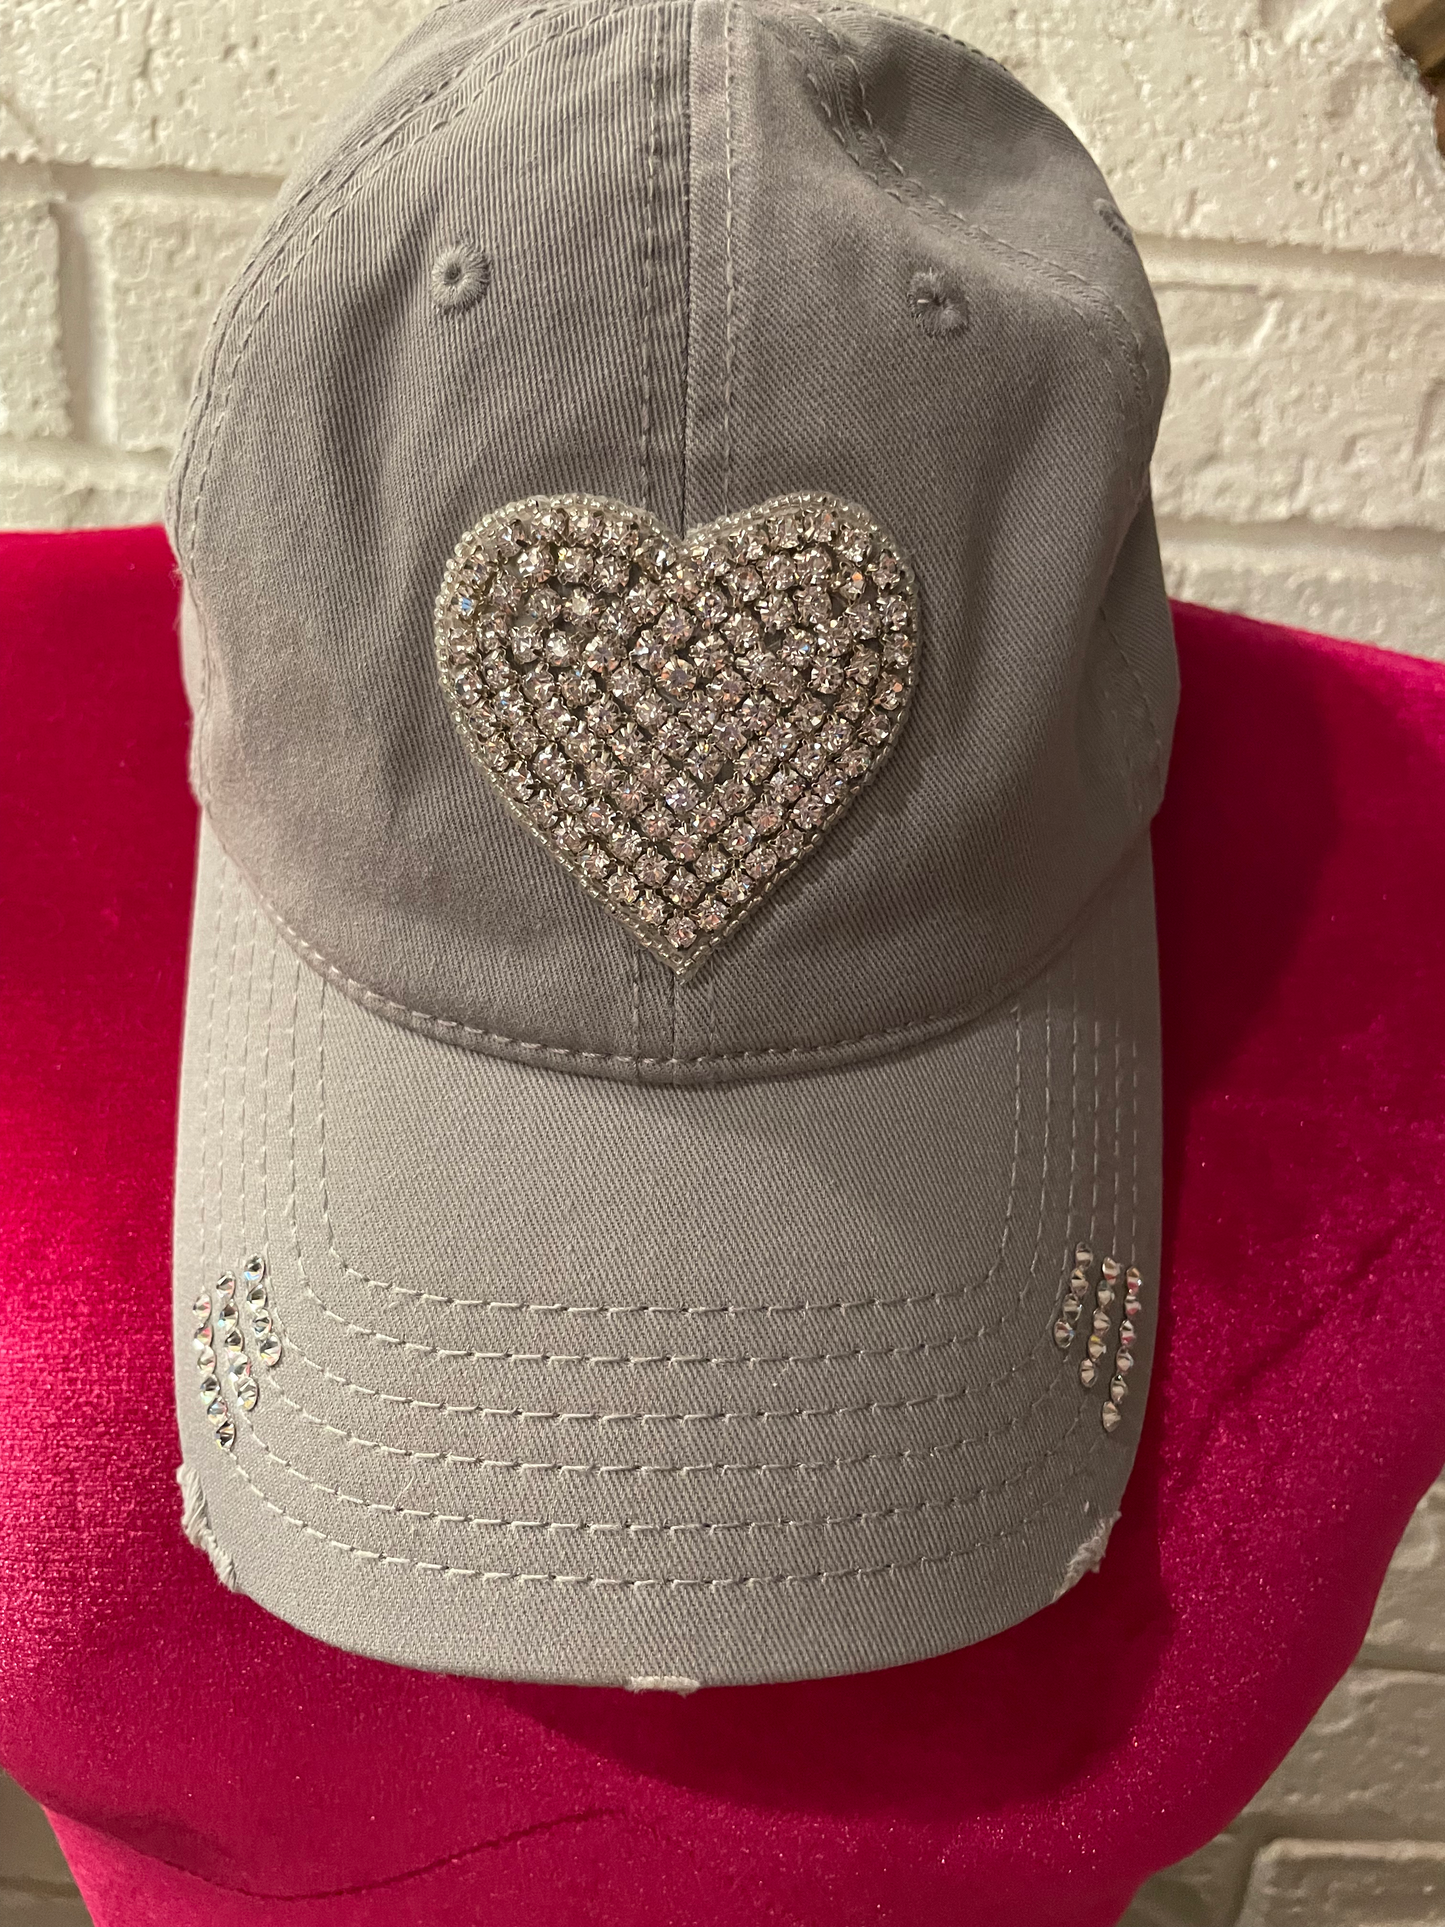 Scandalicious Rhinestone Cap Multiple colors/styles available